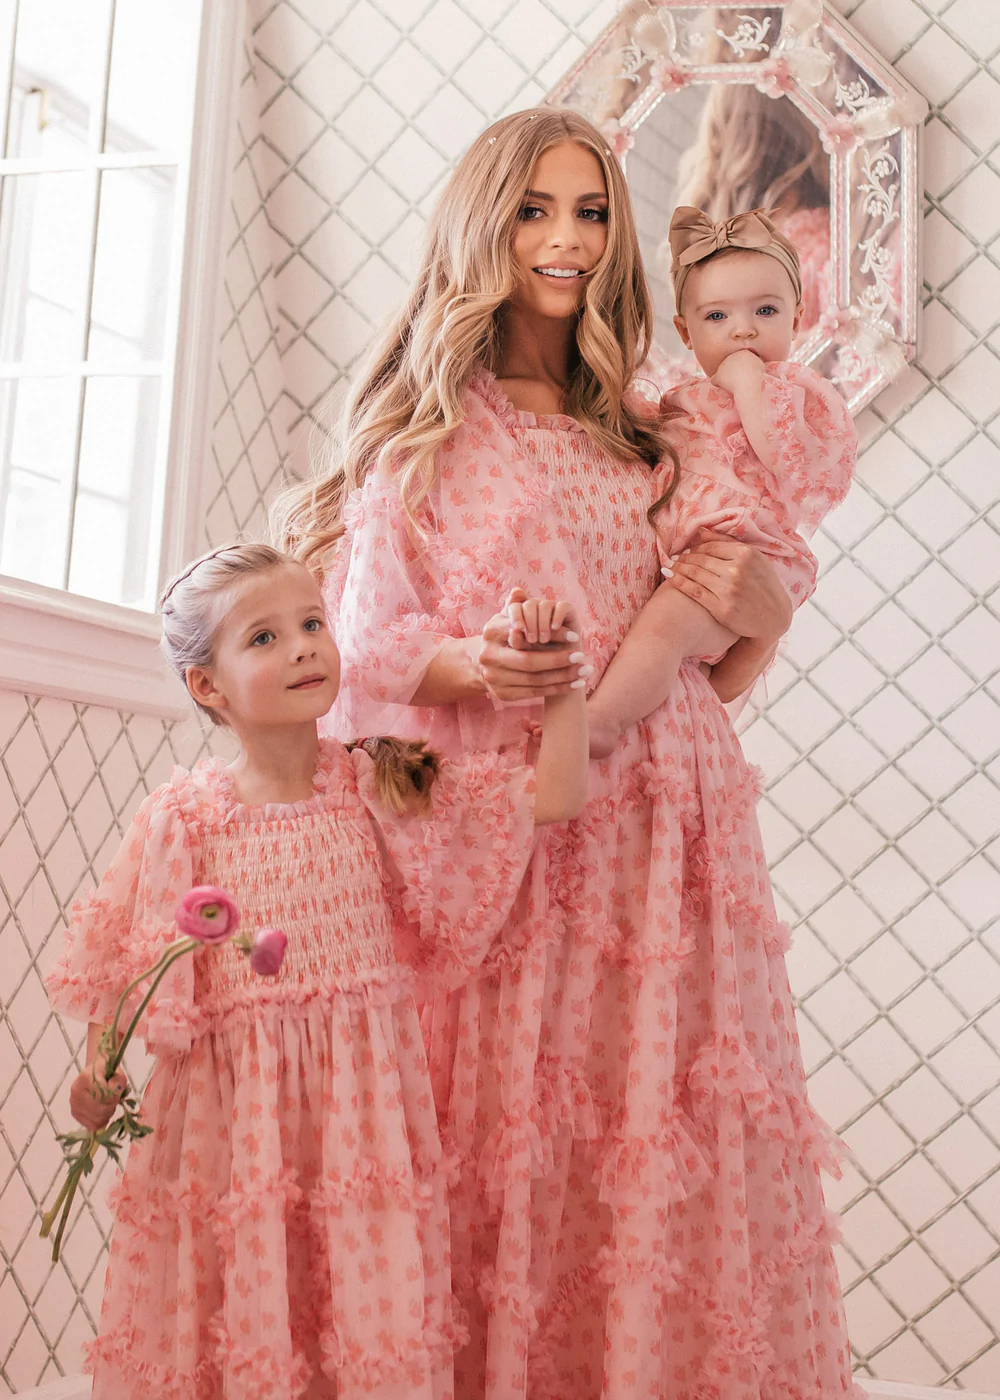 Romantic pink mommy and me Easter dresses. | The Dating Divas